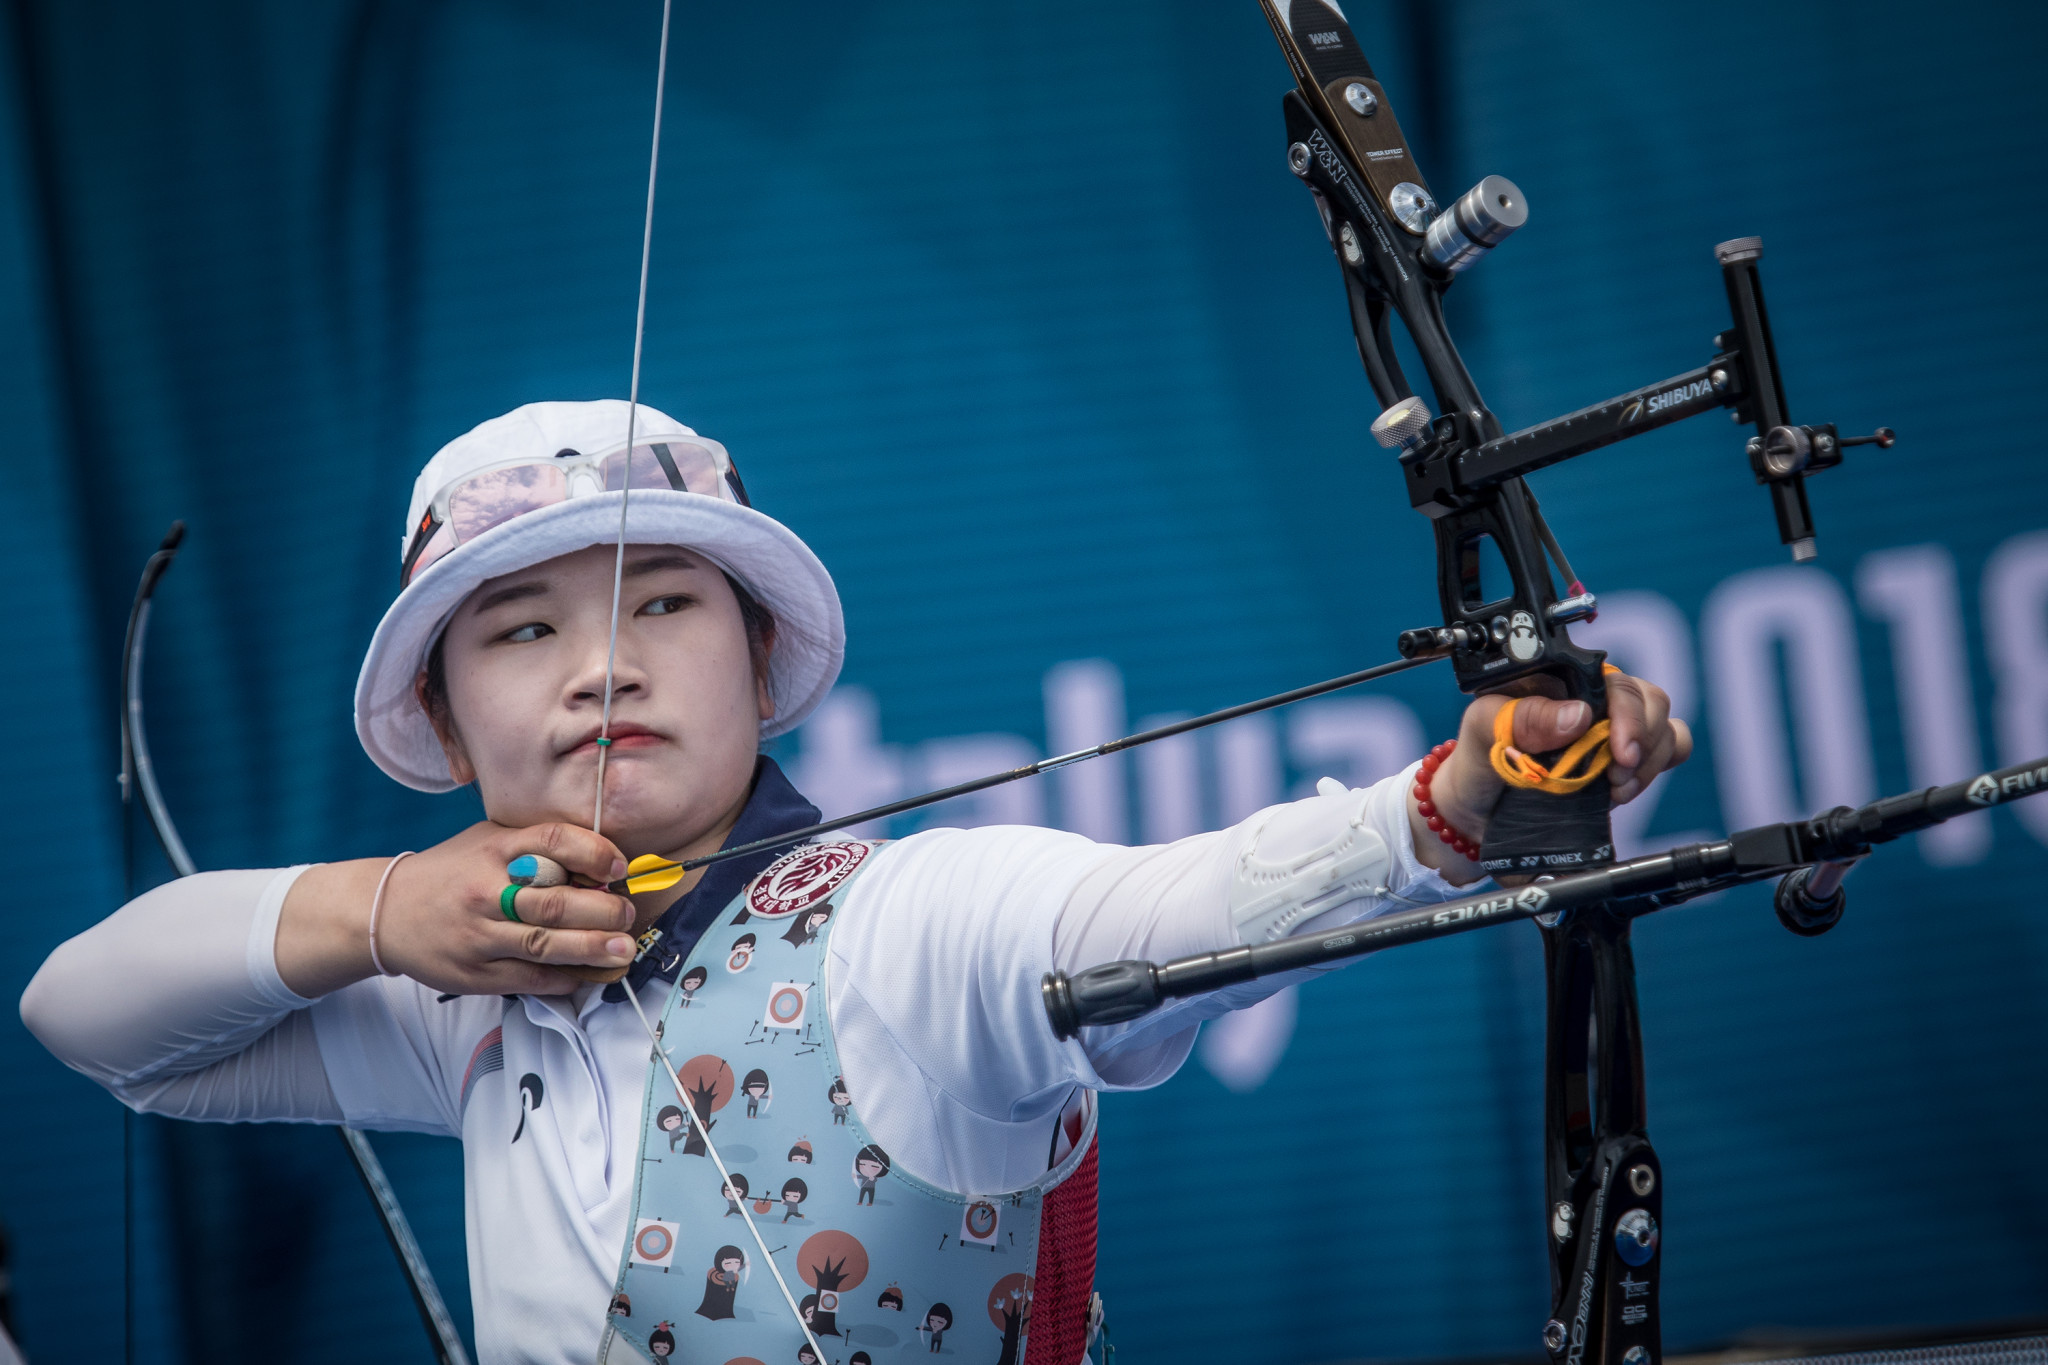 Kang Chae Young made it into the women's recurve final with ease at the Indoor Archery World Series event in Nimes ©Getty Images